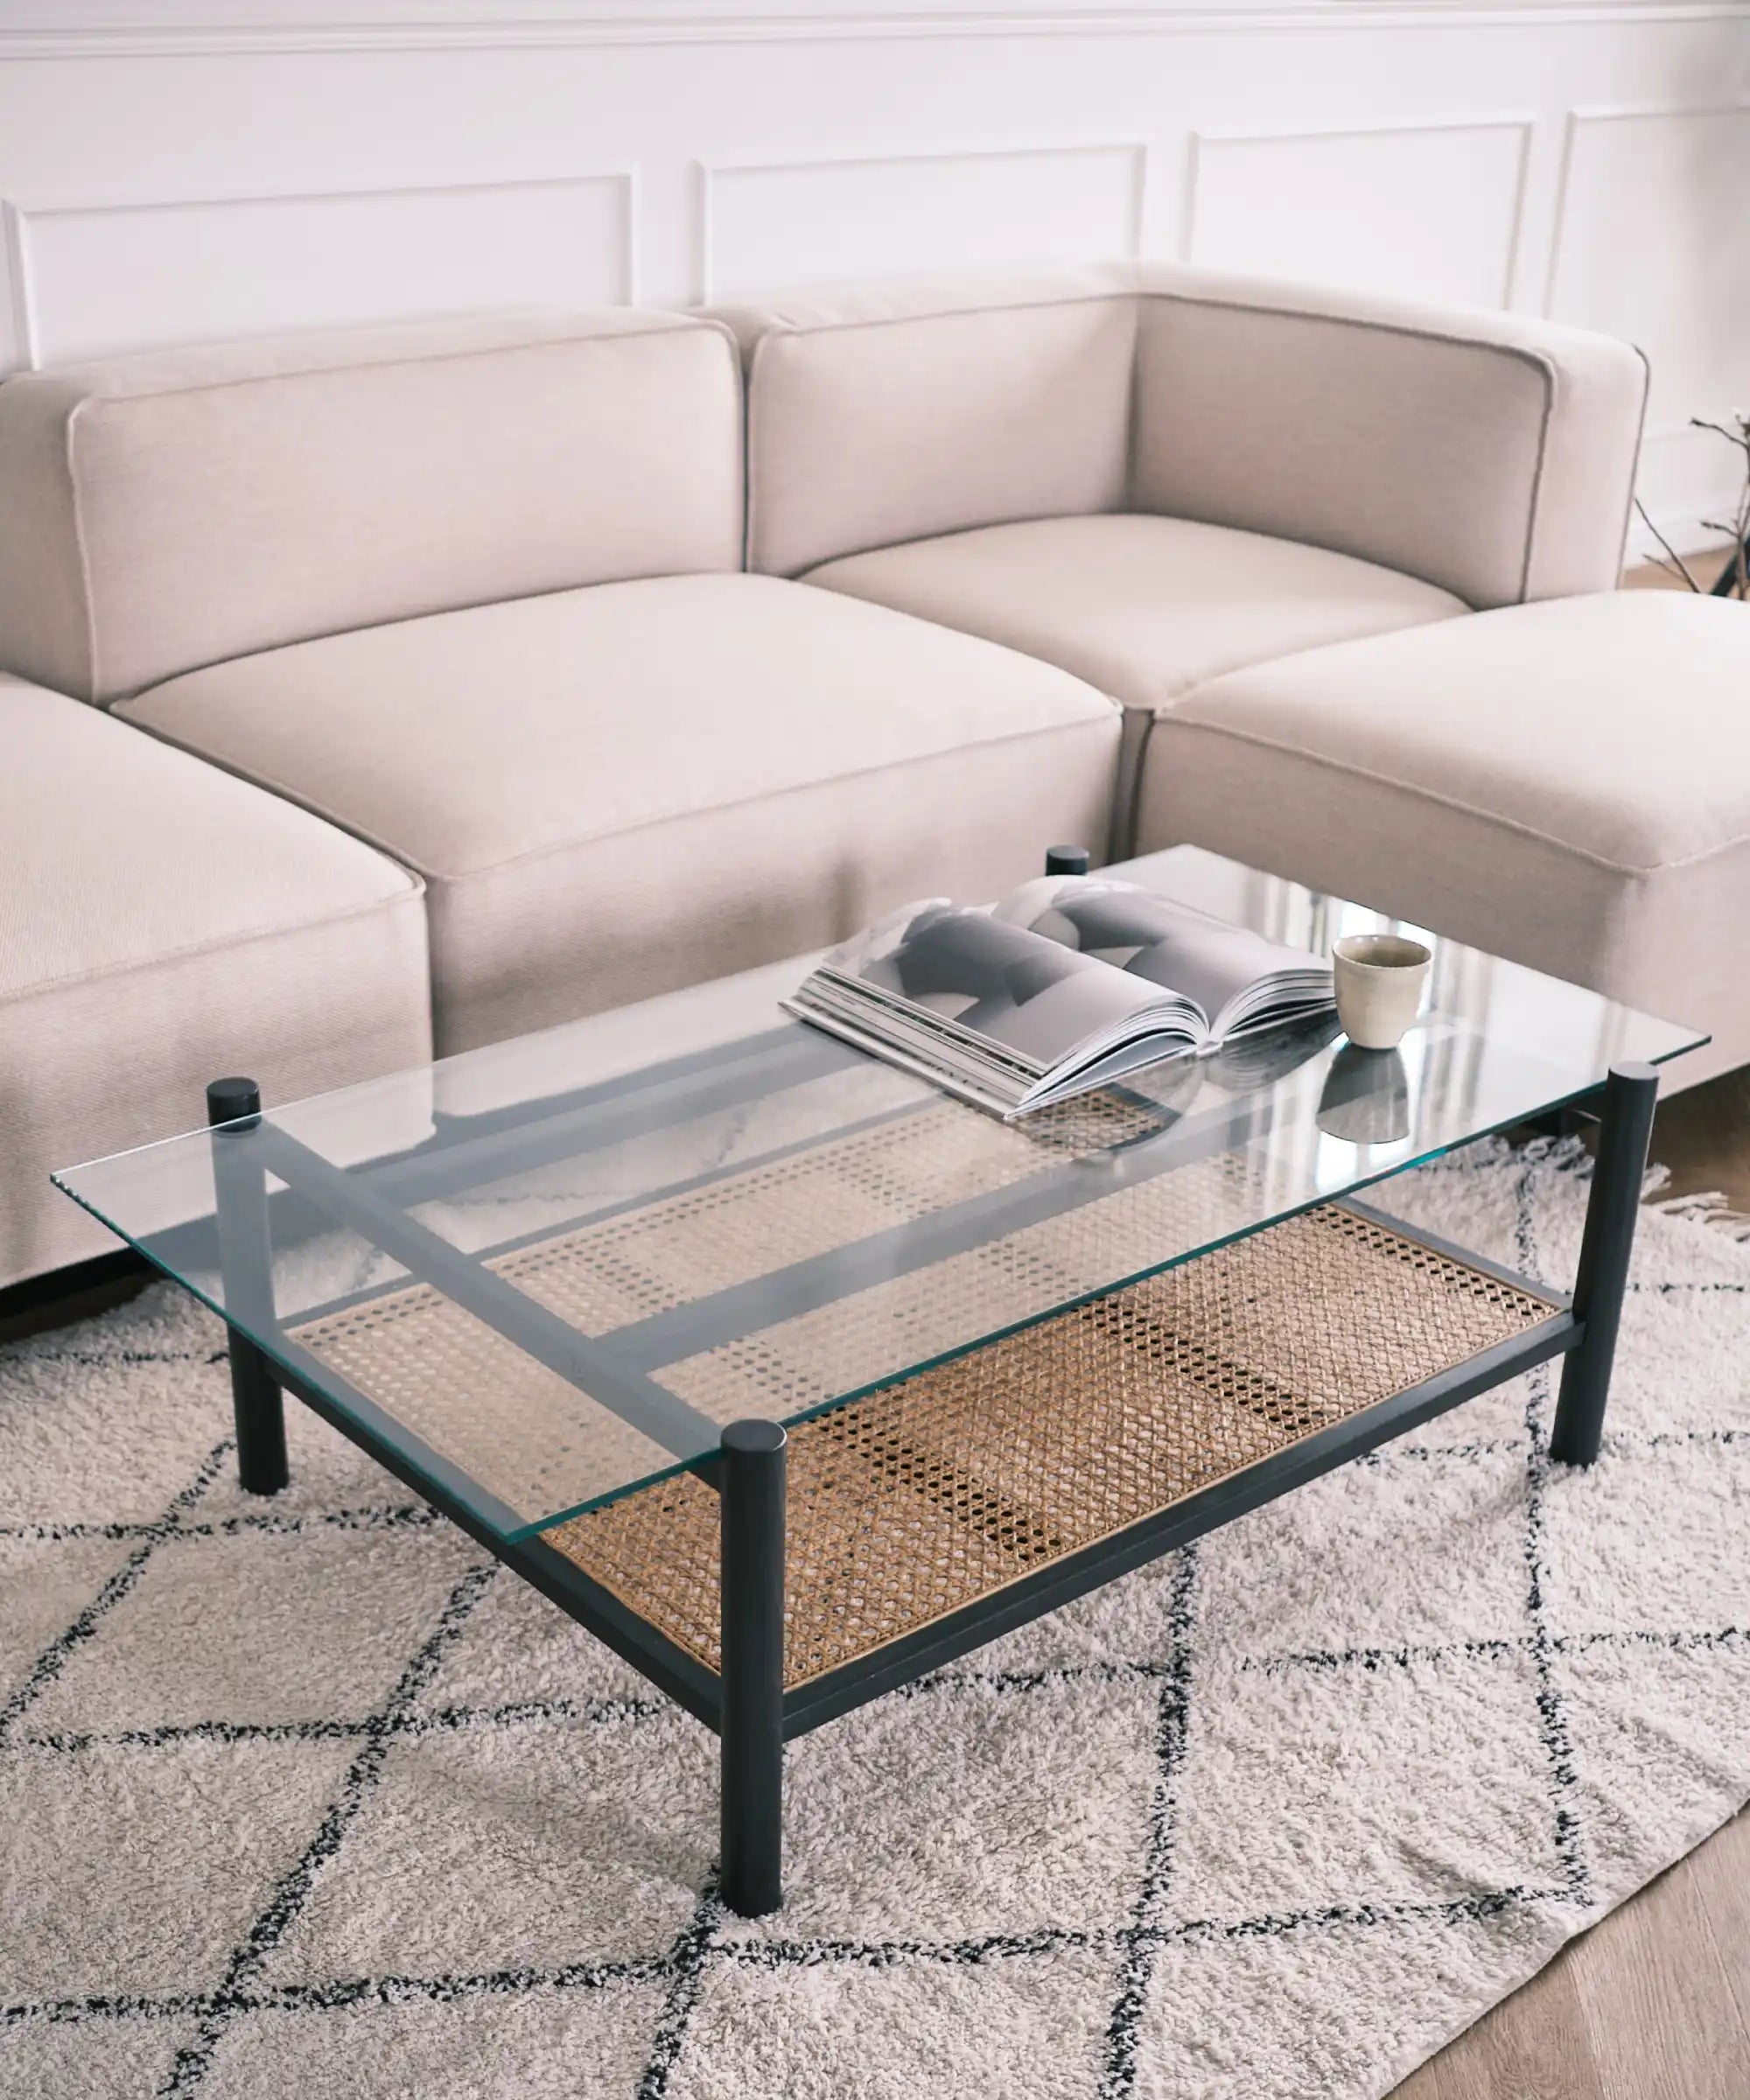 Neo coffee table with glass top - Black